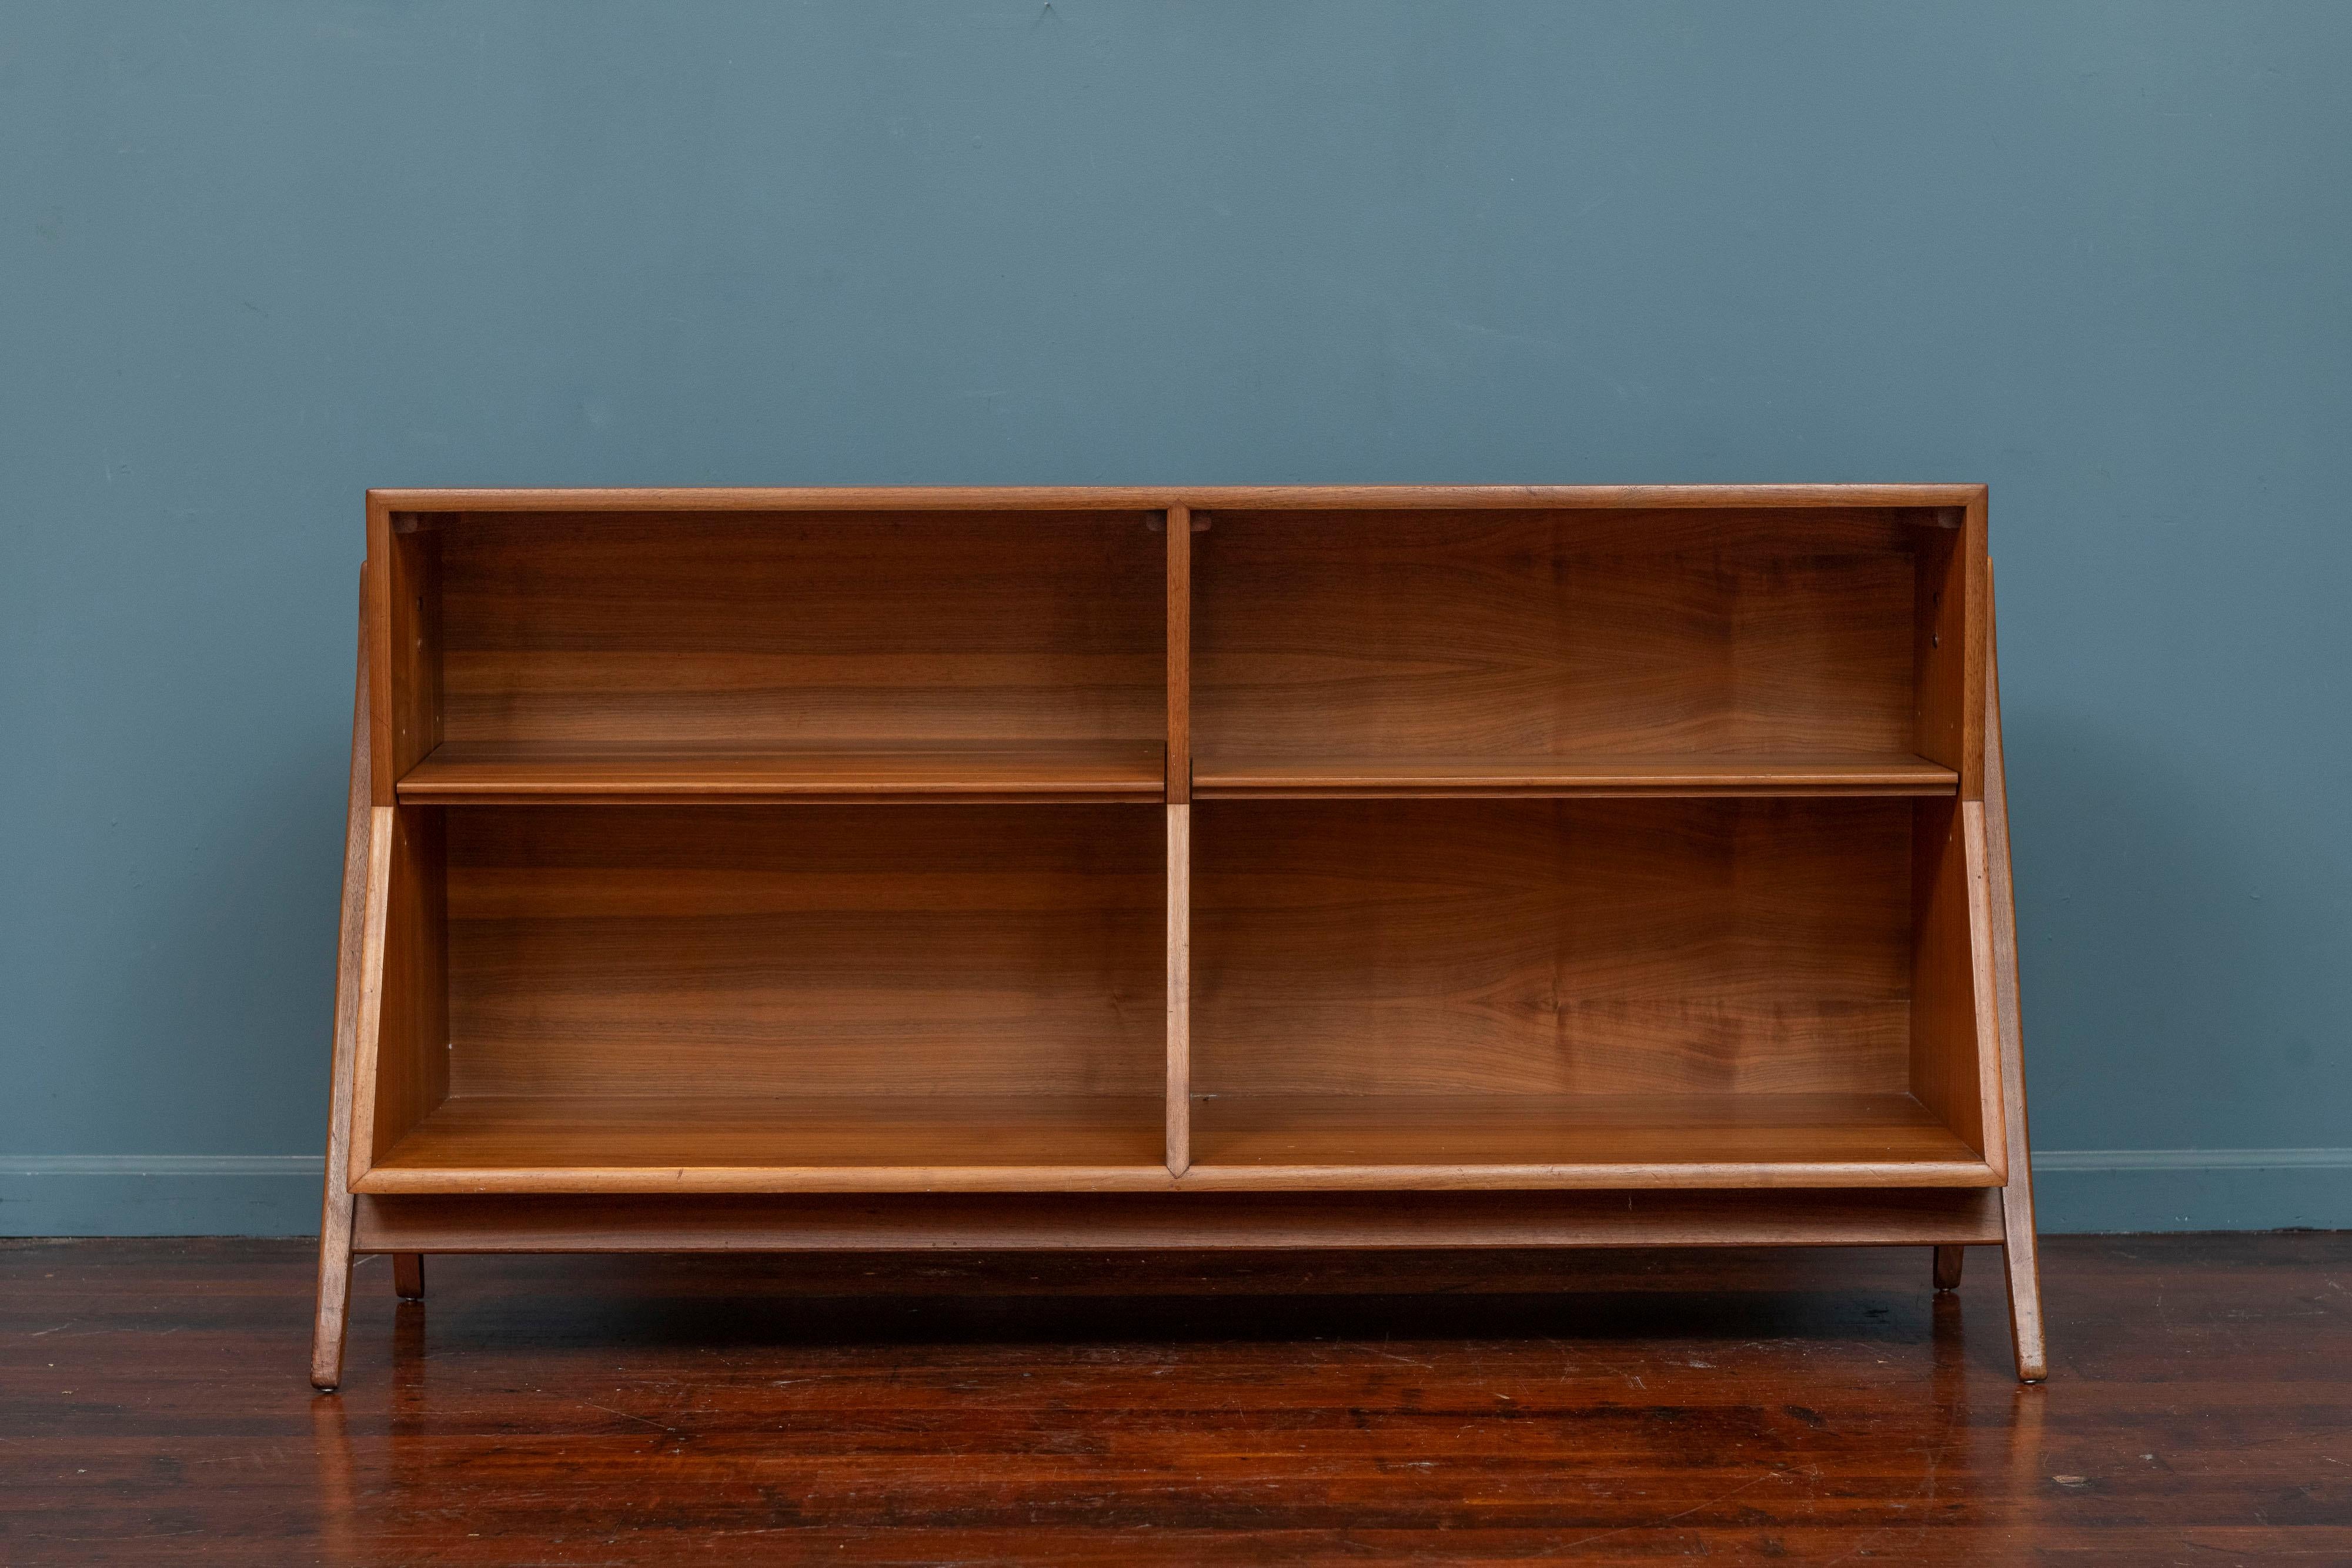 Kipp Stewart design bookcase or console table for his Declaration Line for Drexel Furniture. Made in figured walnut with two adjustable shelves perfect for records or displaying your collectibles. Striking profile with splayed legs and angular